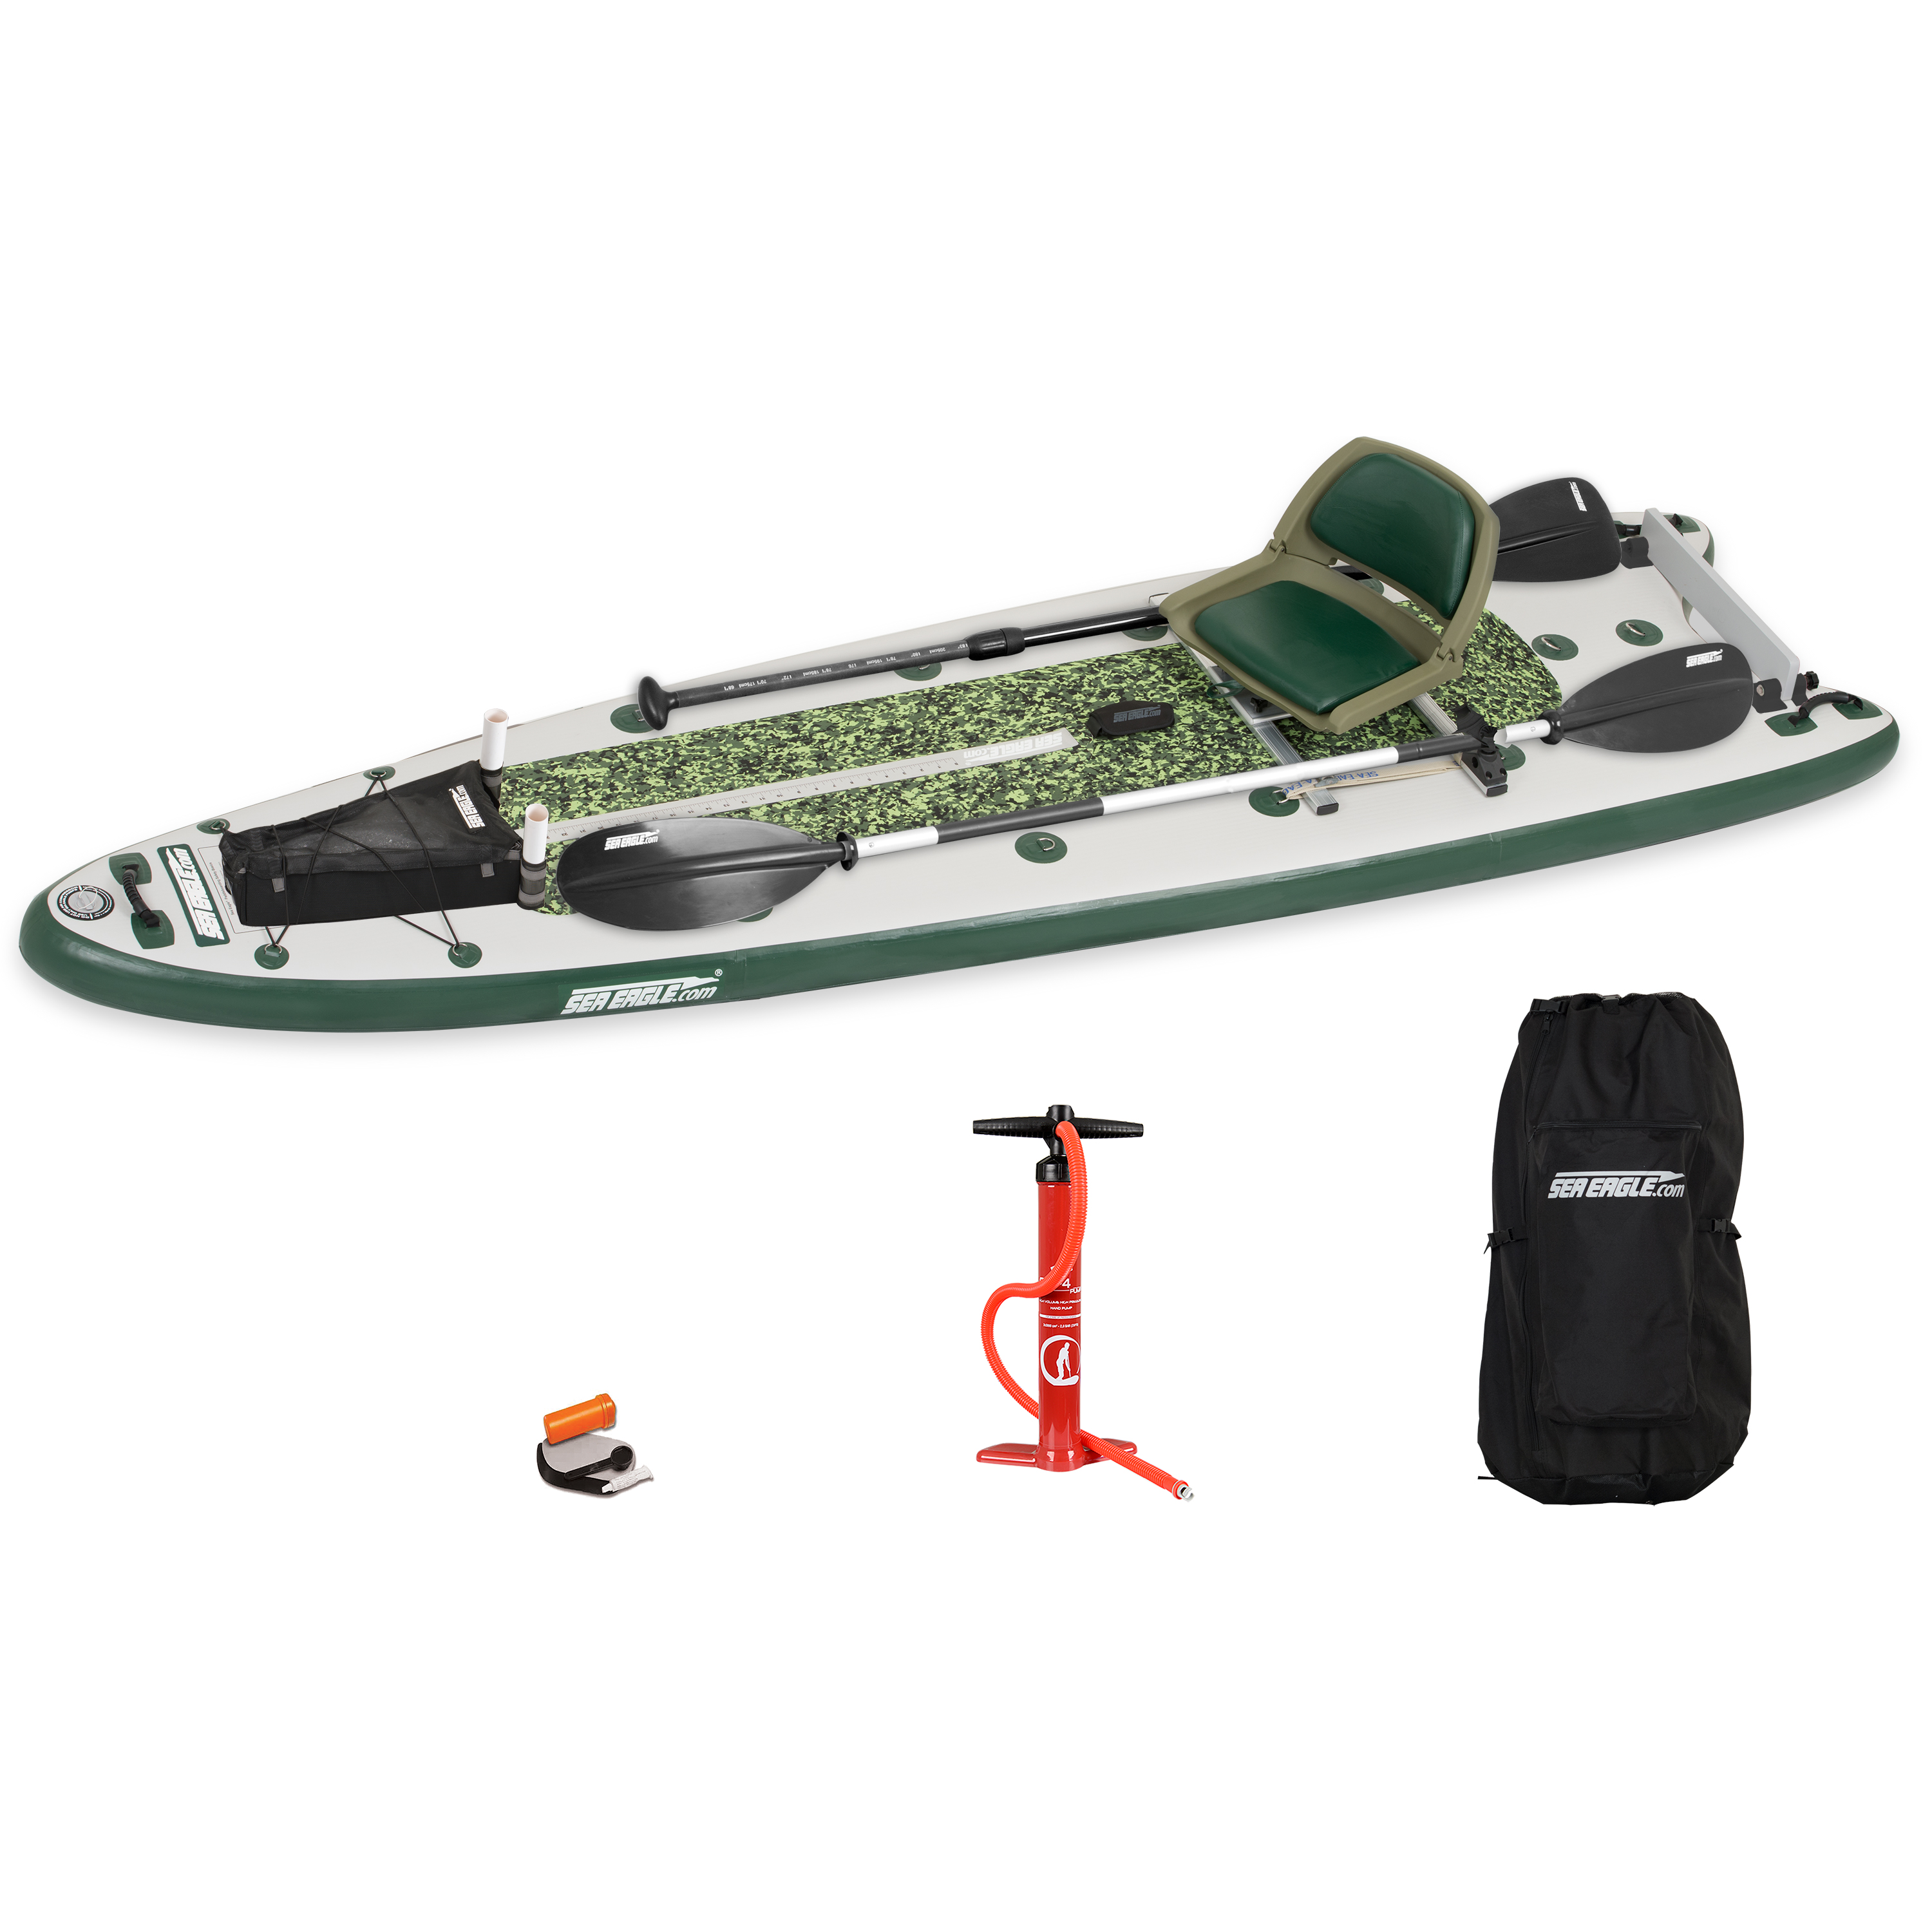 Sea Eagle FS126 12’6” Inflatable FishSUP Fishing Stand-Up Paddleboard w/Paddle(s), Storage Box, Pump, Removable Transom, Backpack/Optional Seat - Sit, Stand, Fish, Motor, or Troll- Fishing Rig Package - image 1 of 6